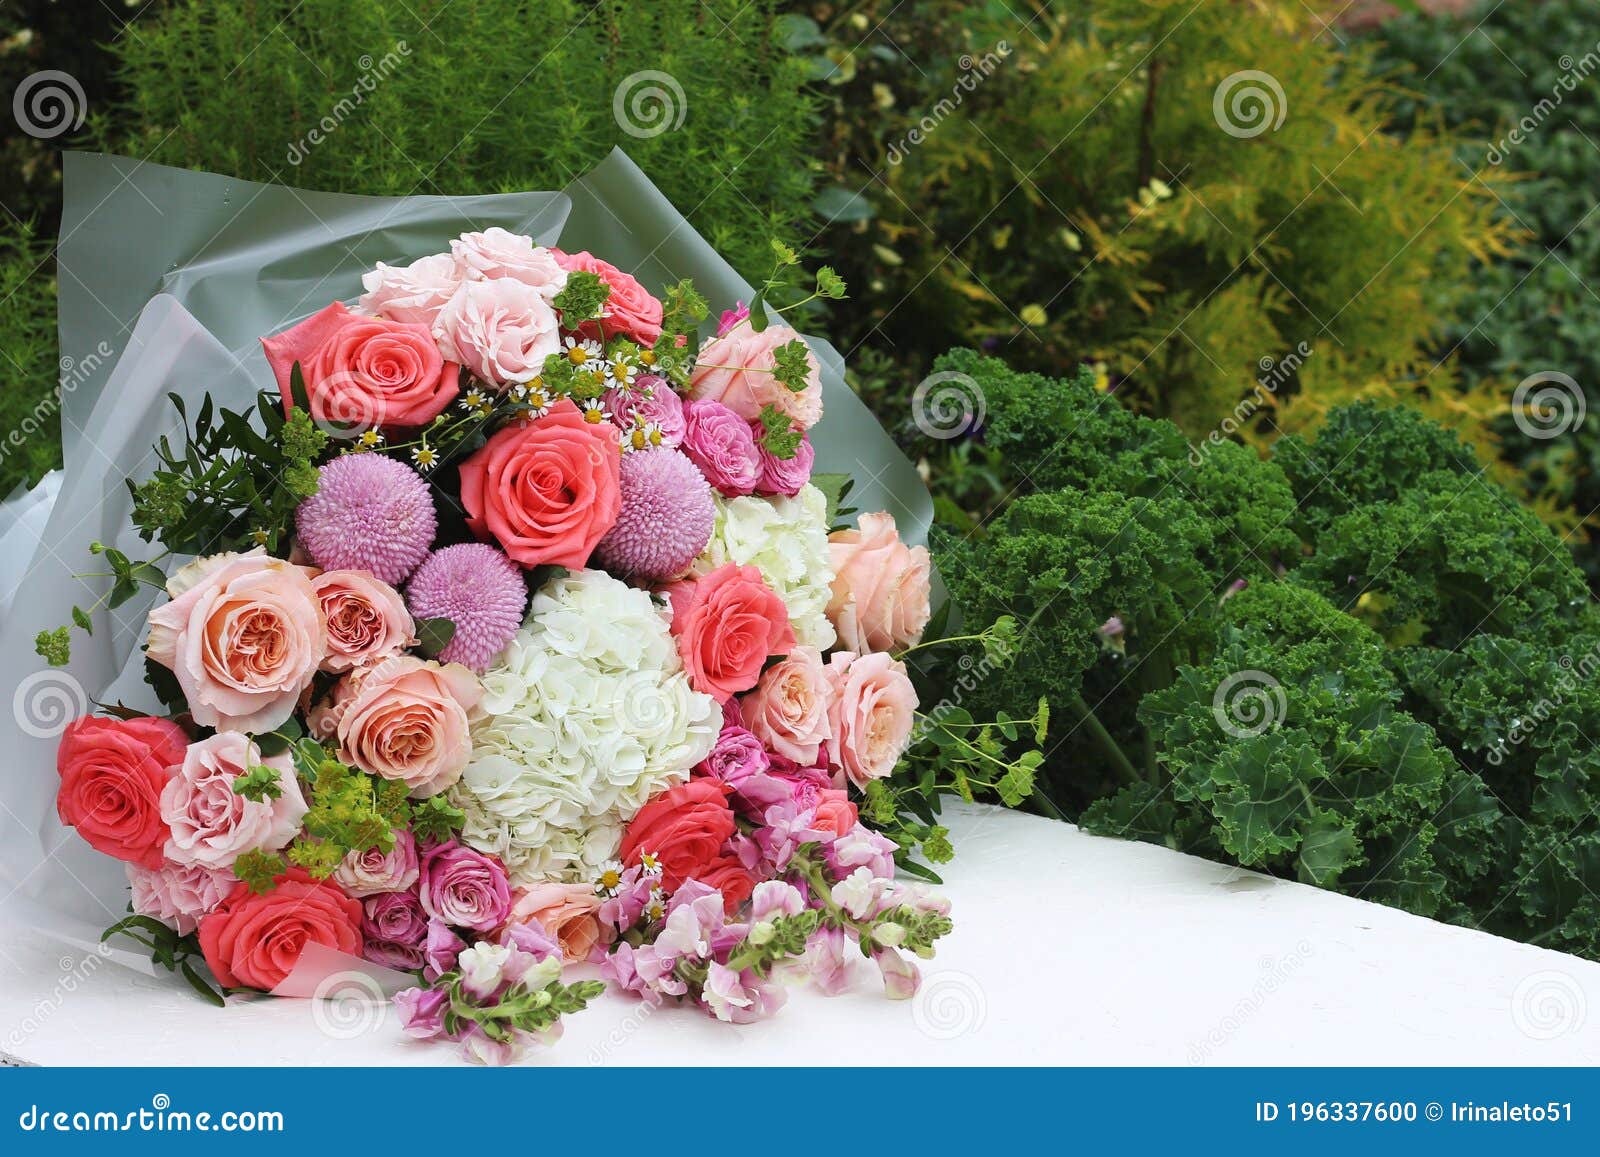 Floral Arrangement or Wedding Bouquet of Pink and White Roses ...